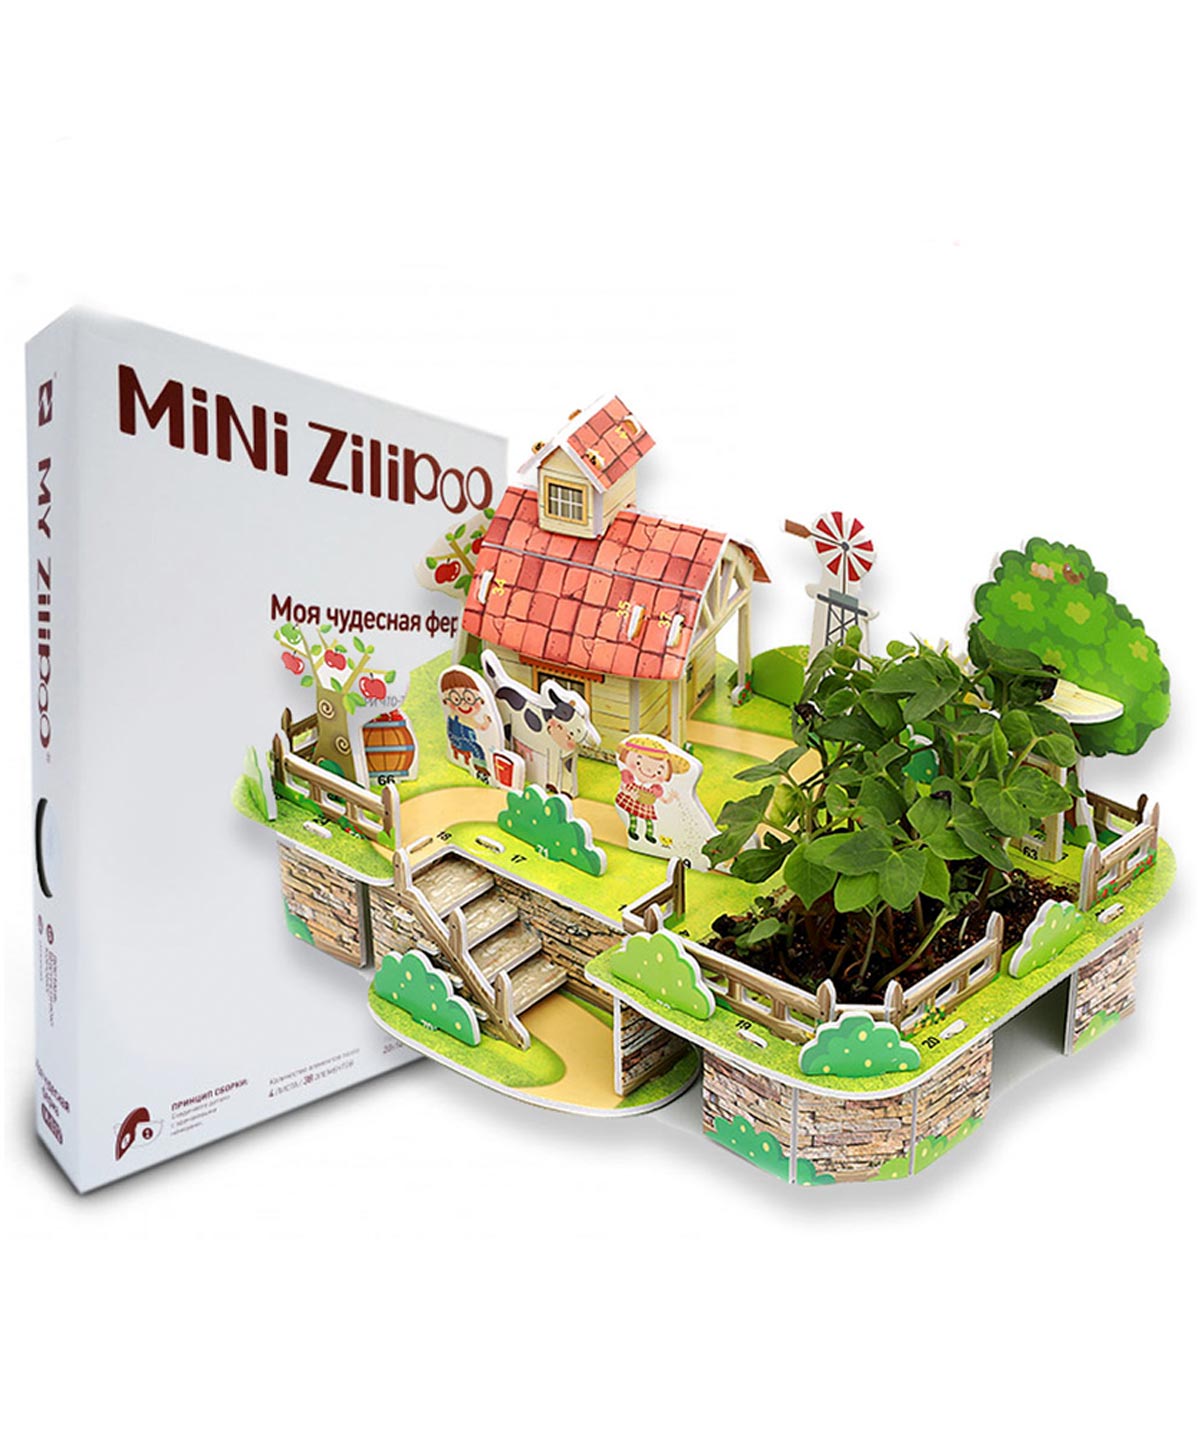 3D Puzzle MINI Zilipoo - My wonderful garden with natural plants